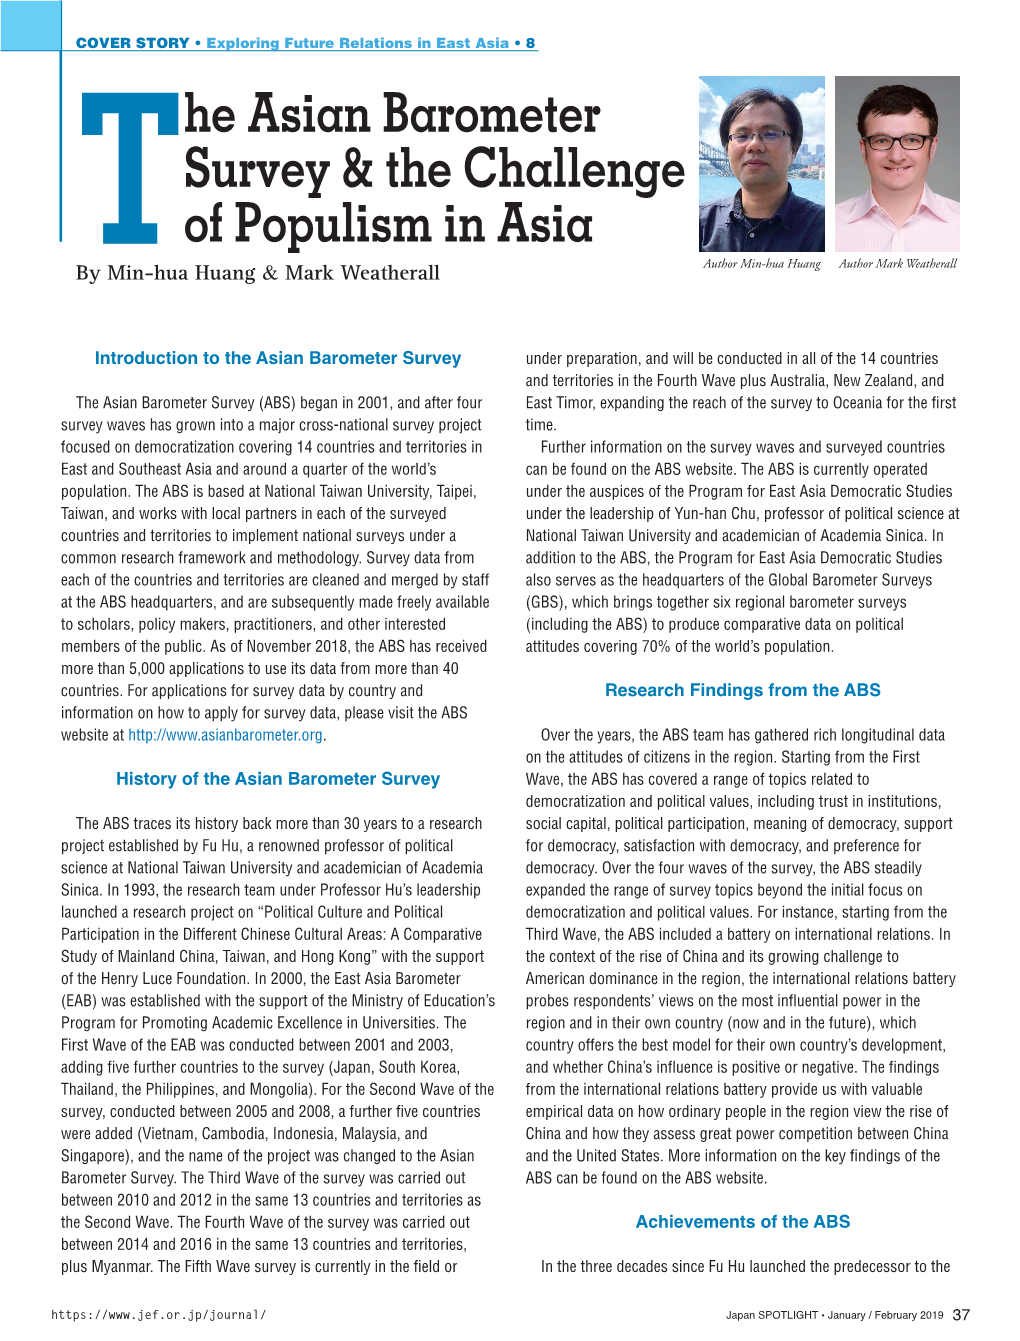 He Asian Barometer Survey & the Challenge of Populism in Asia